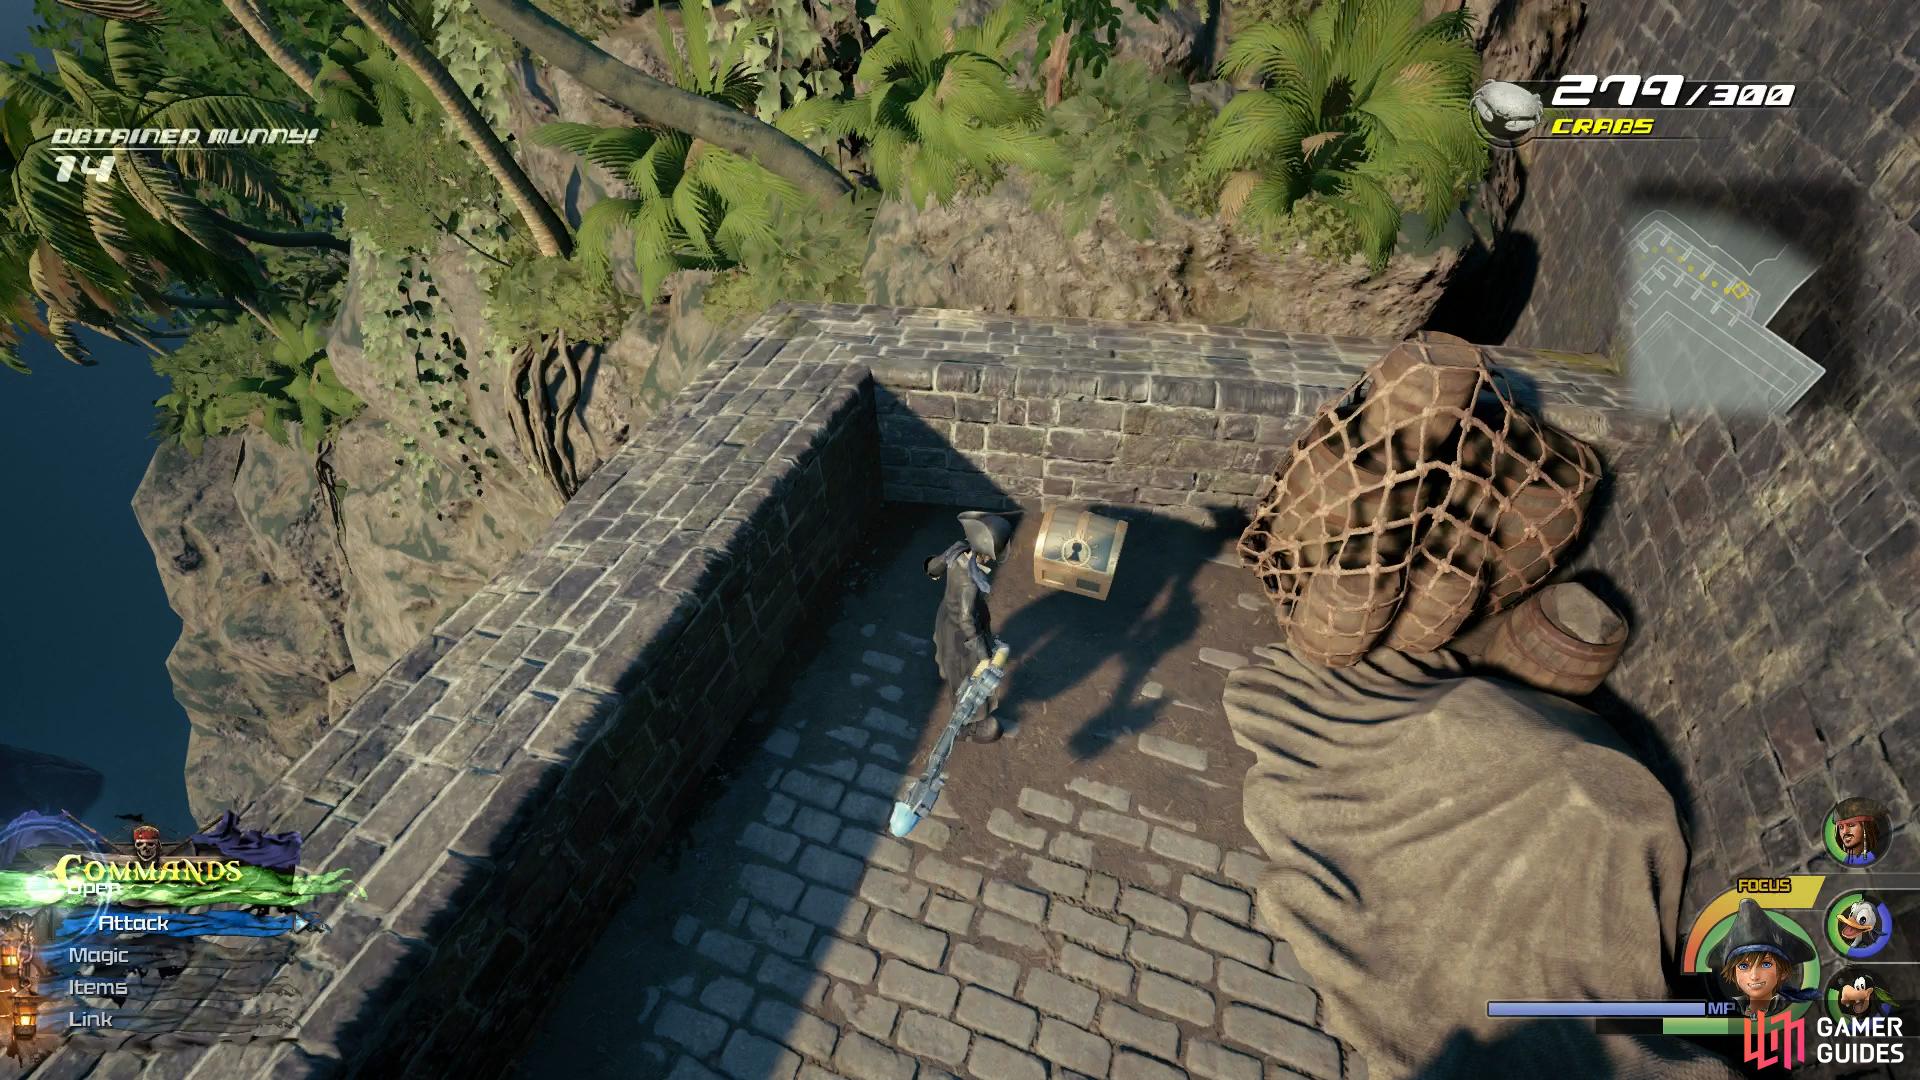 Head into the Fort’s courtyard to find this chest.